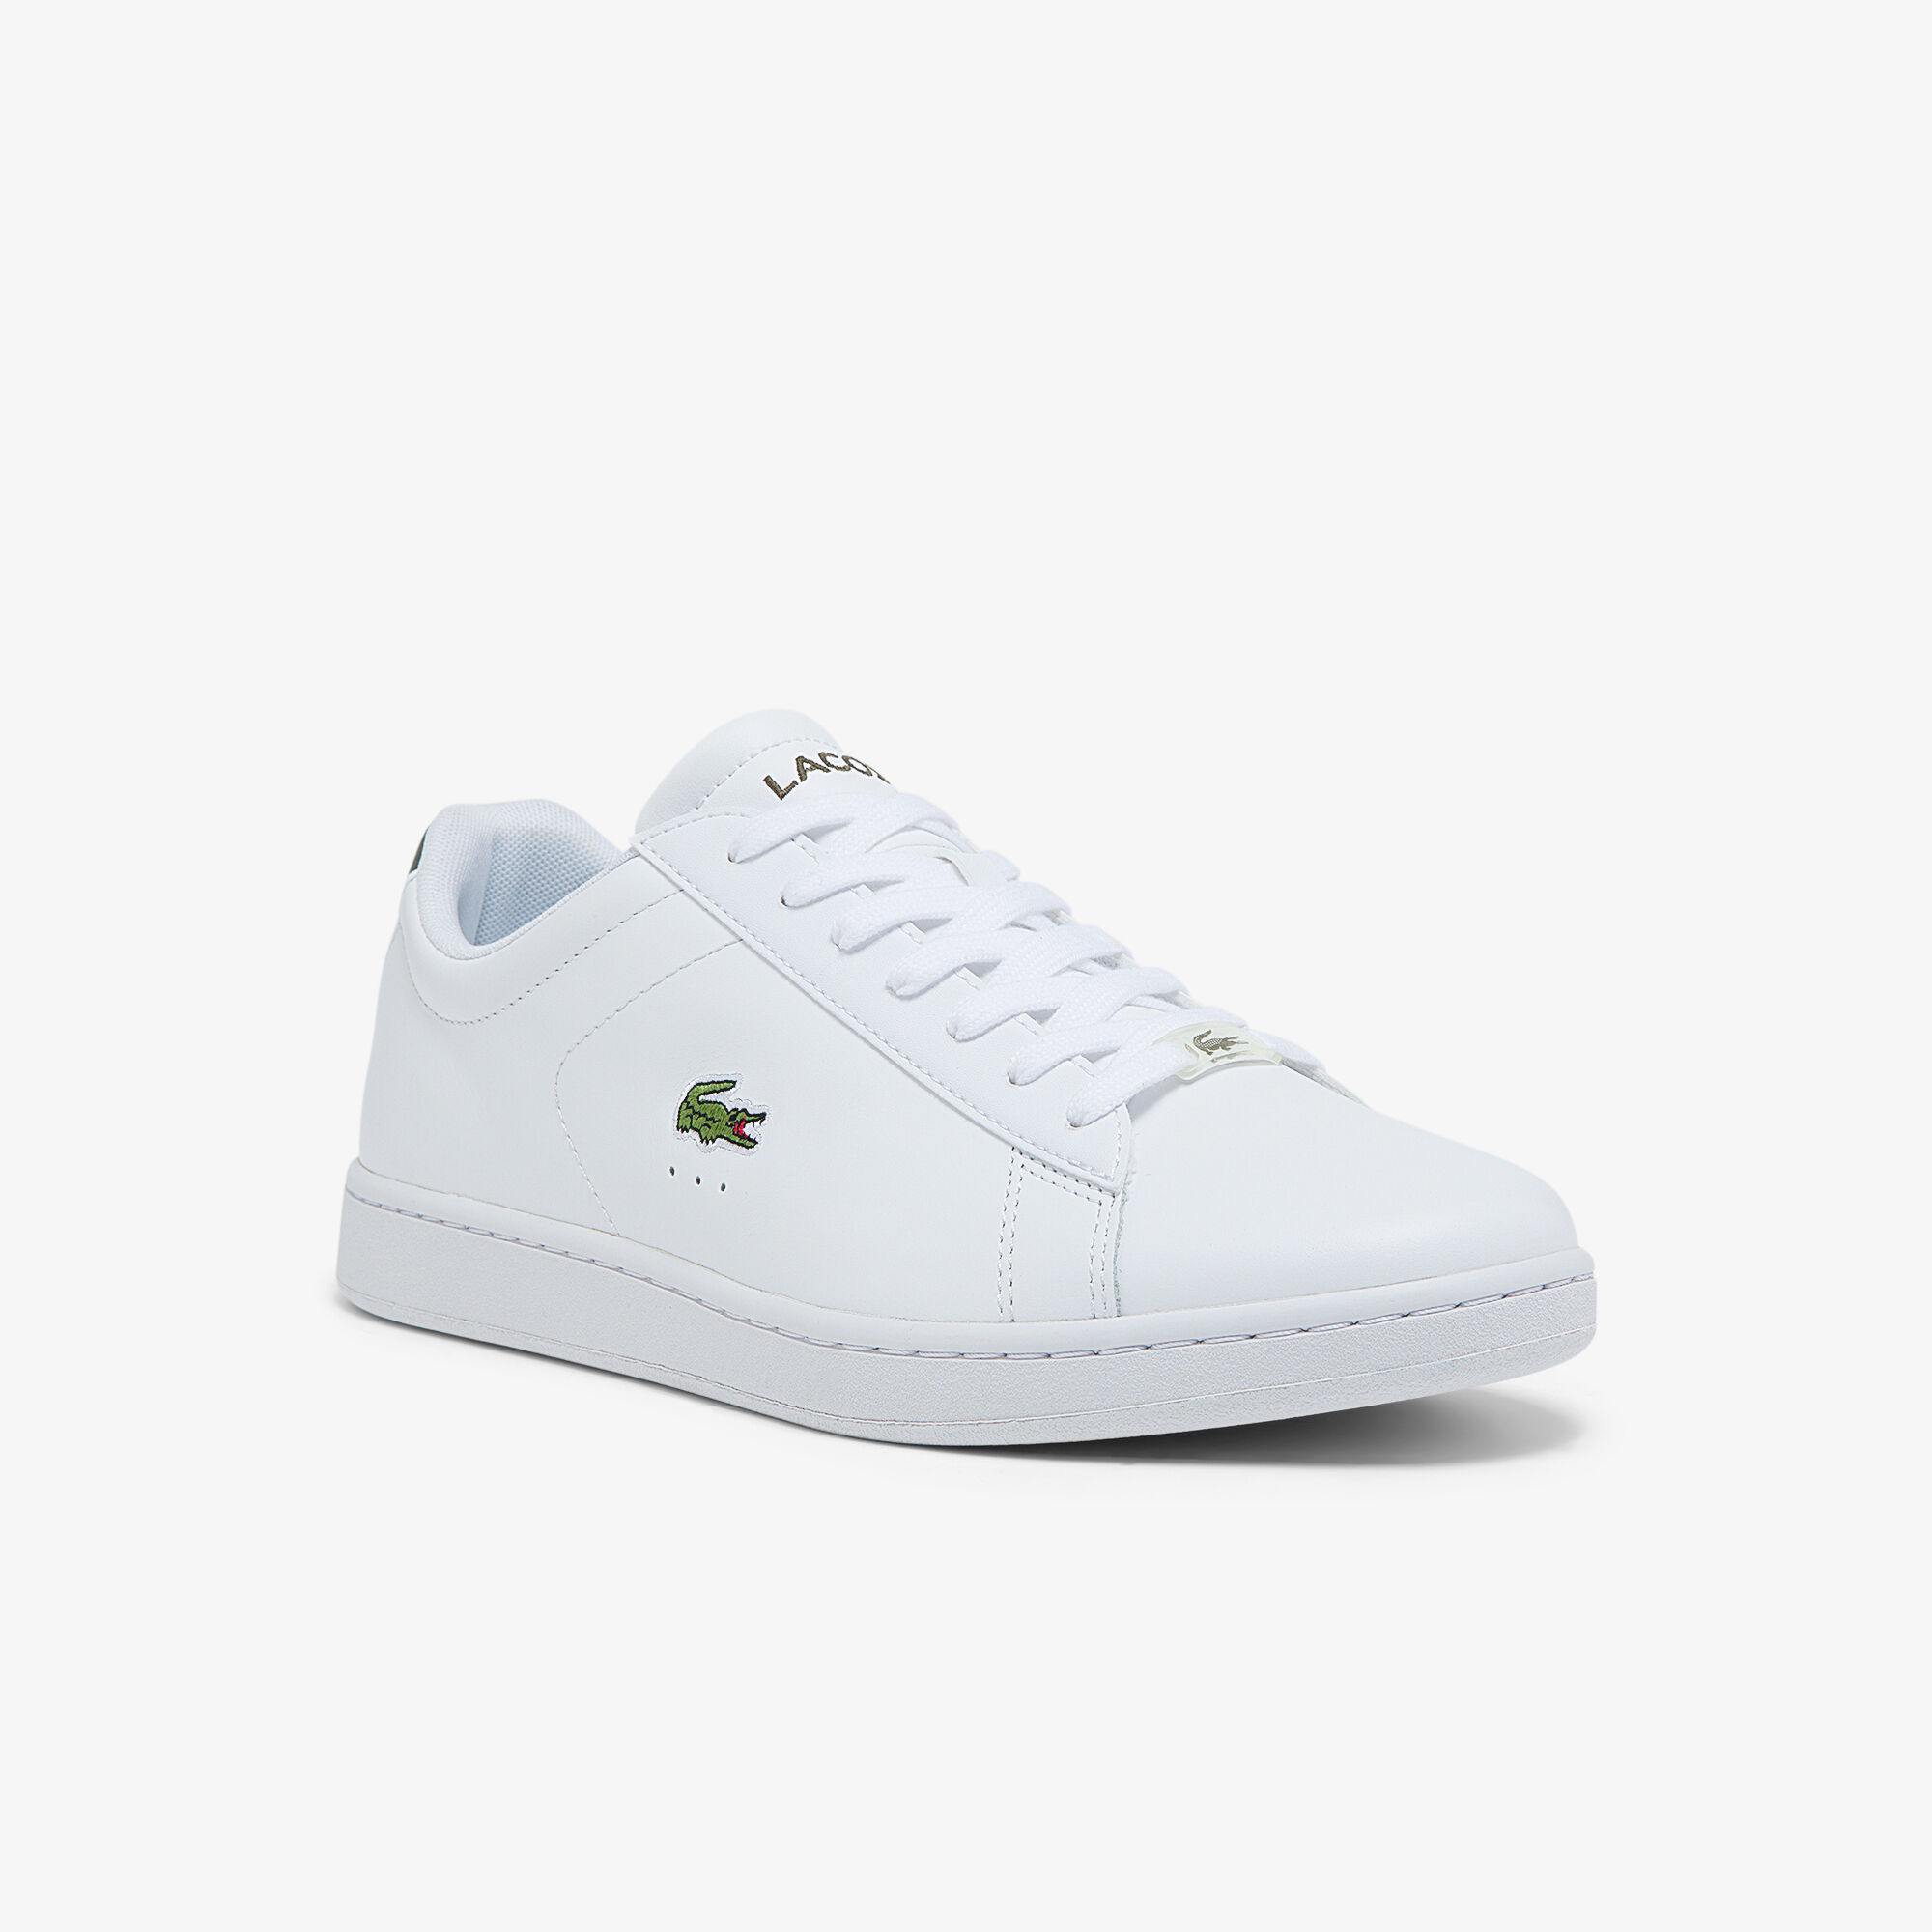 men: Sneakers, Trainers, Boots | LACOSTE